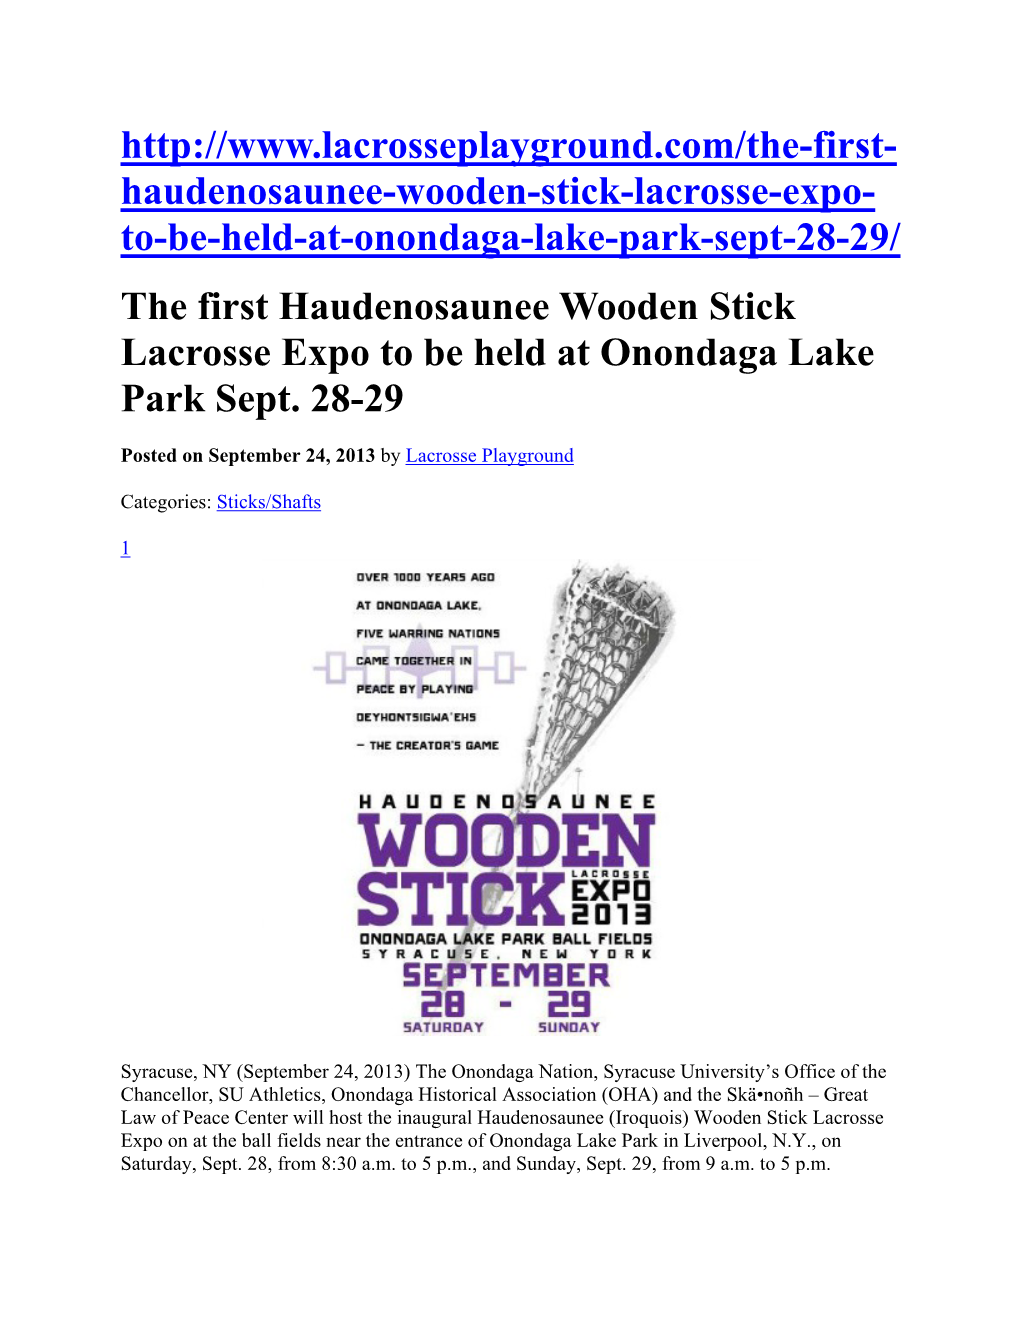 The First Haudenosaunee Wooden Stick Lacrosse Expo to Be Held at Onondaga Lake Park Sept